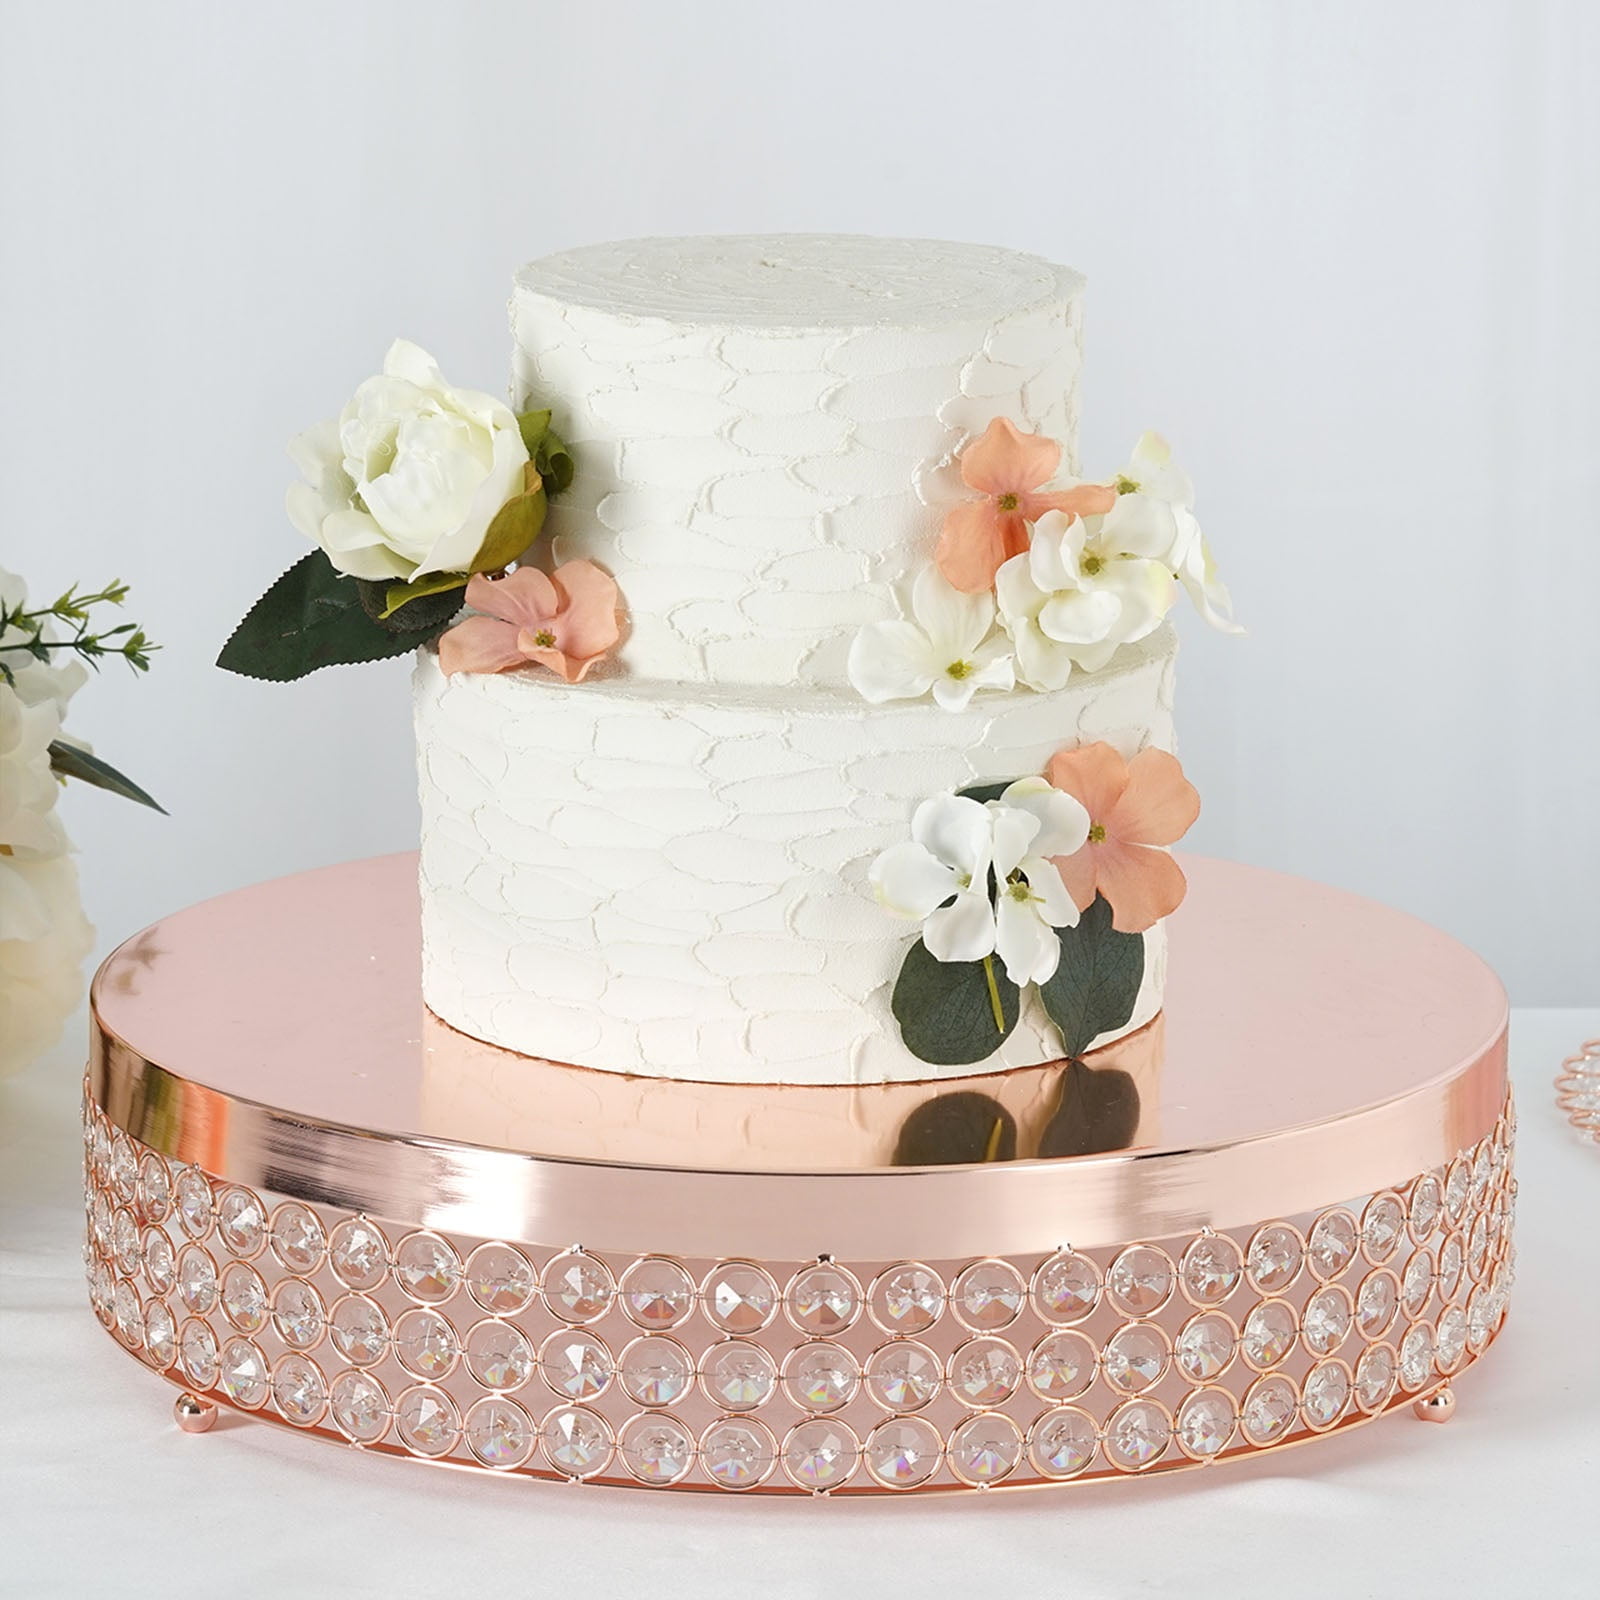 ROSE GOLD METAL 13.5" wide Cake Stand with Crystal Beads Party Wedding Reception 